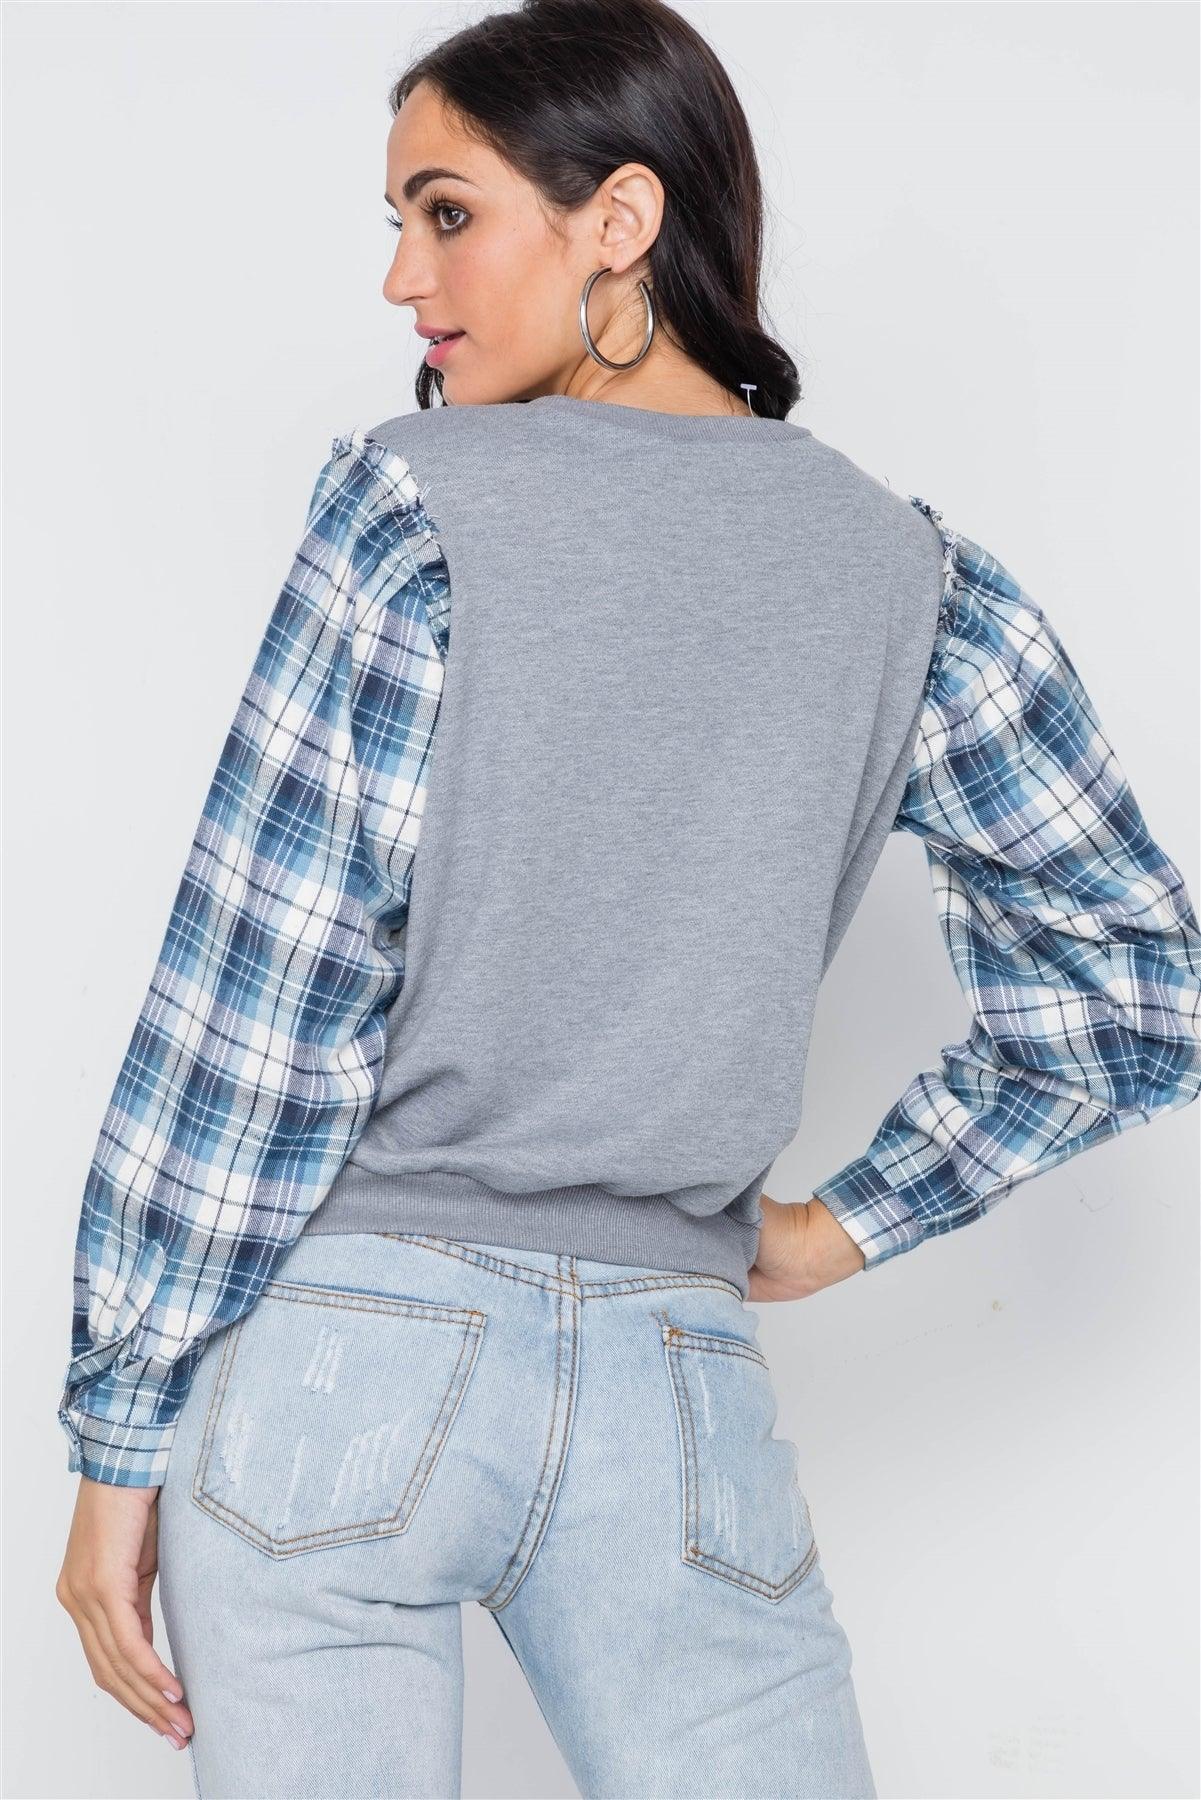 Grey Knit Plaid Contrast Sleeves Combo Top